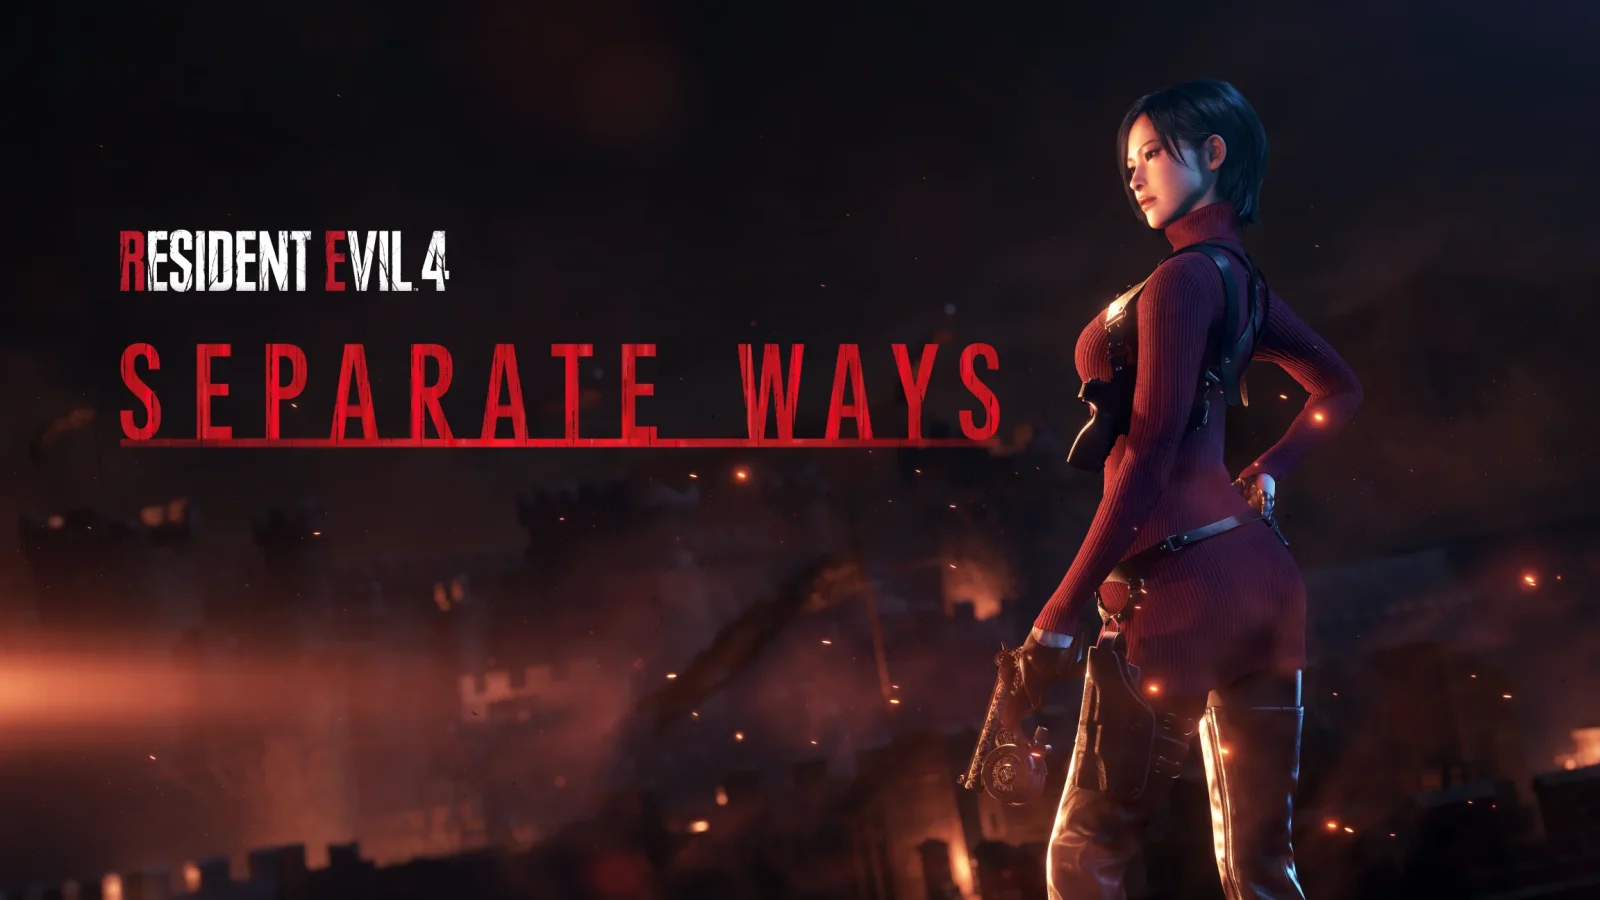 Resident Evil 4: Separate Ways DLC preview